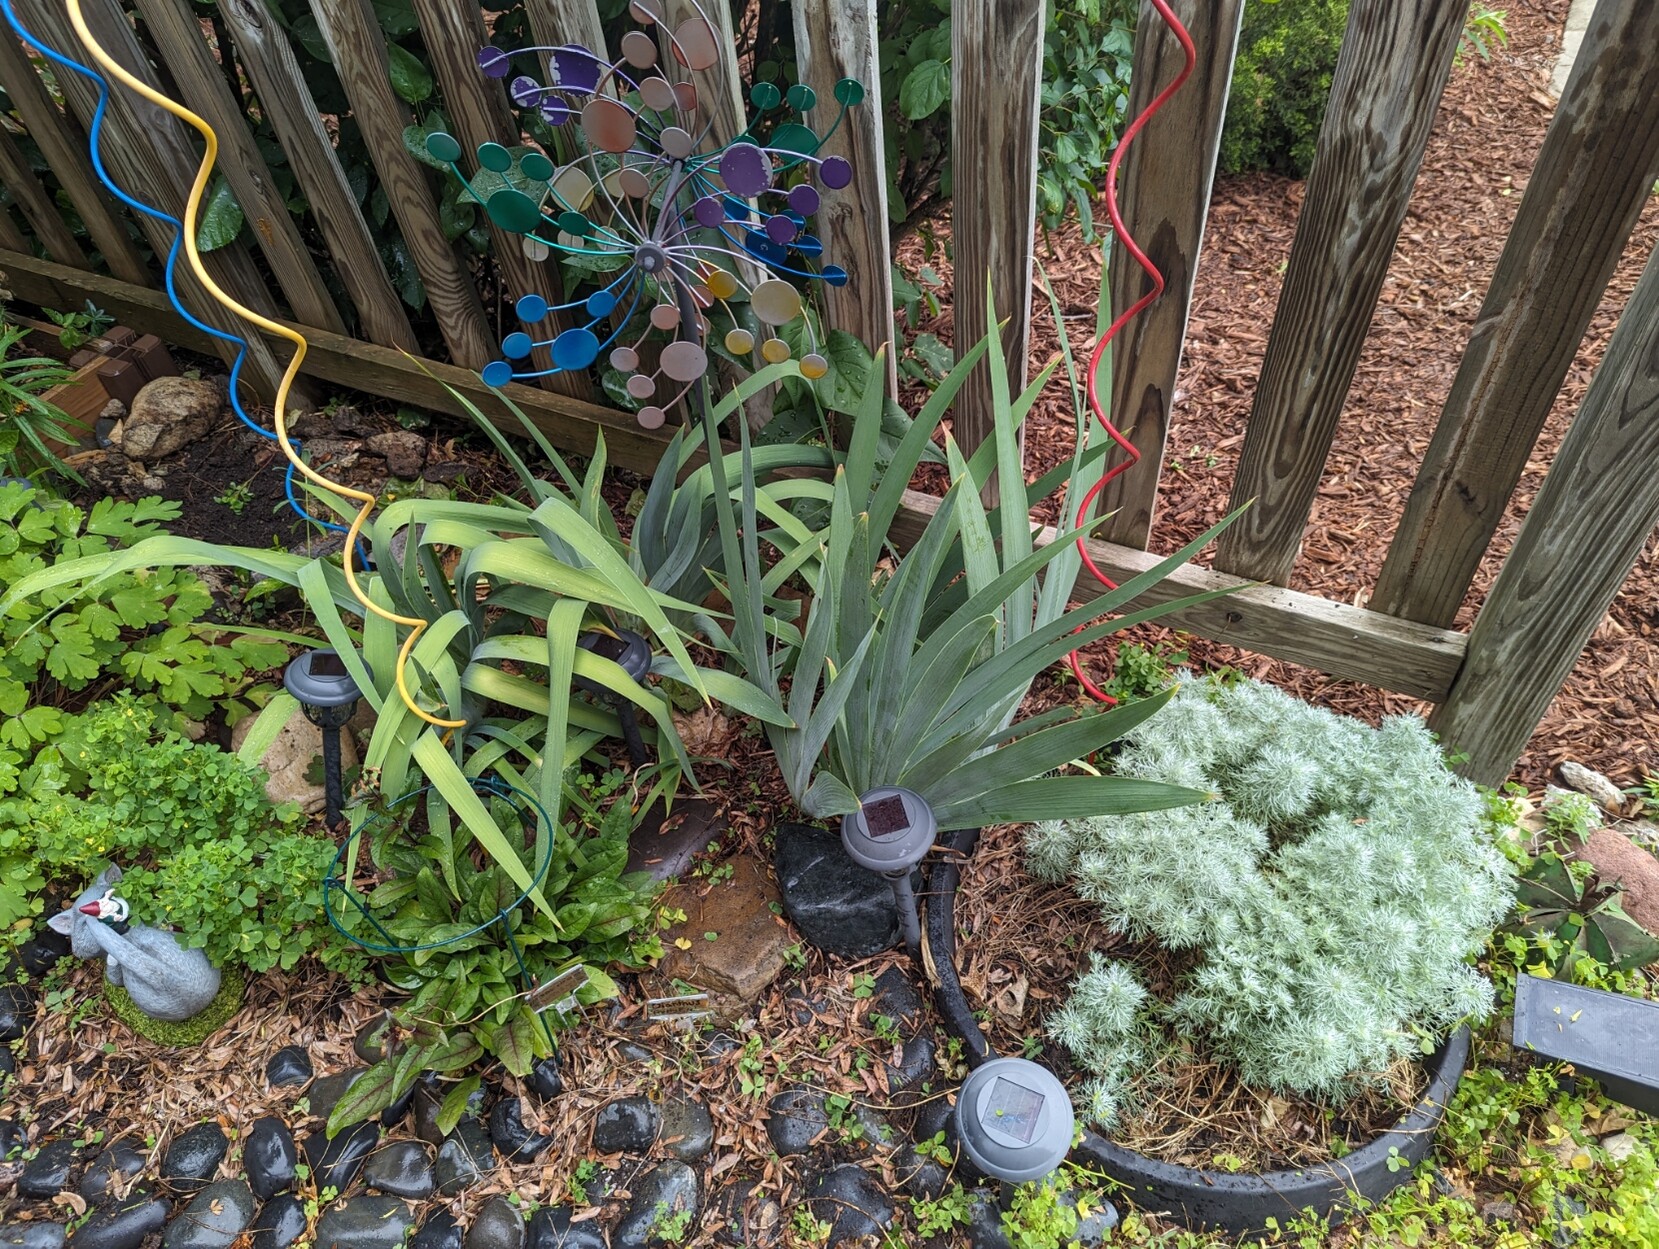 Right corner of my garden. The kitty/gnome statue from the previous photo is in the middle-left of this picture. There are three spiral poles (red, yellow, blue) that I use for accessibility, and many rocks. I like rocks. Plants include: the stubborn <br />irises that don't want to bloom & a short, silver-green fuzzy bush. There is another plant that has spiky, red-veined leaves & some clover.